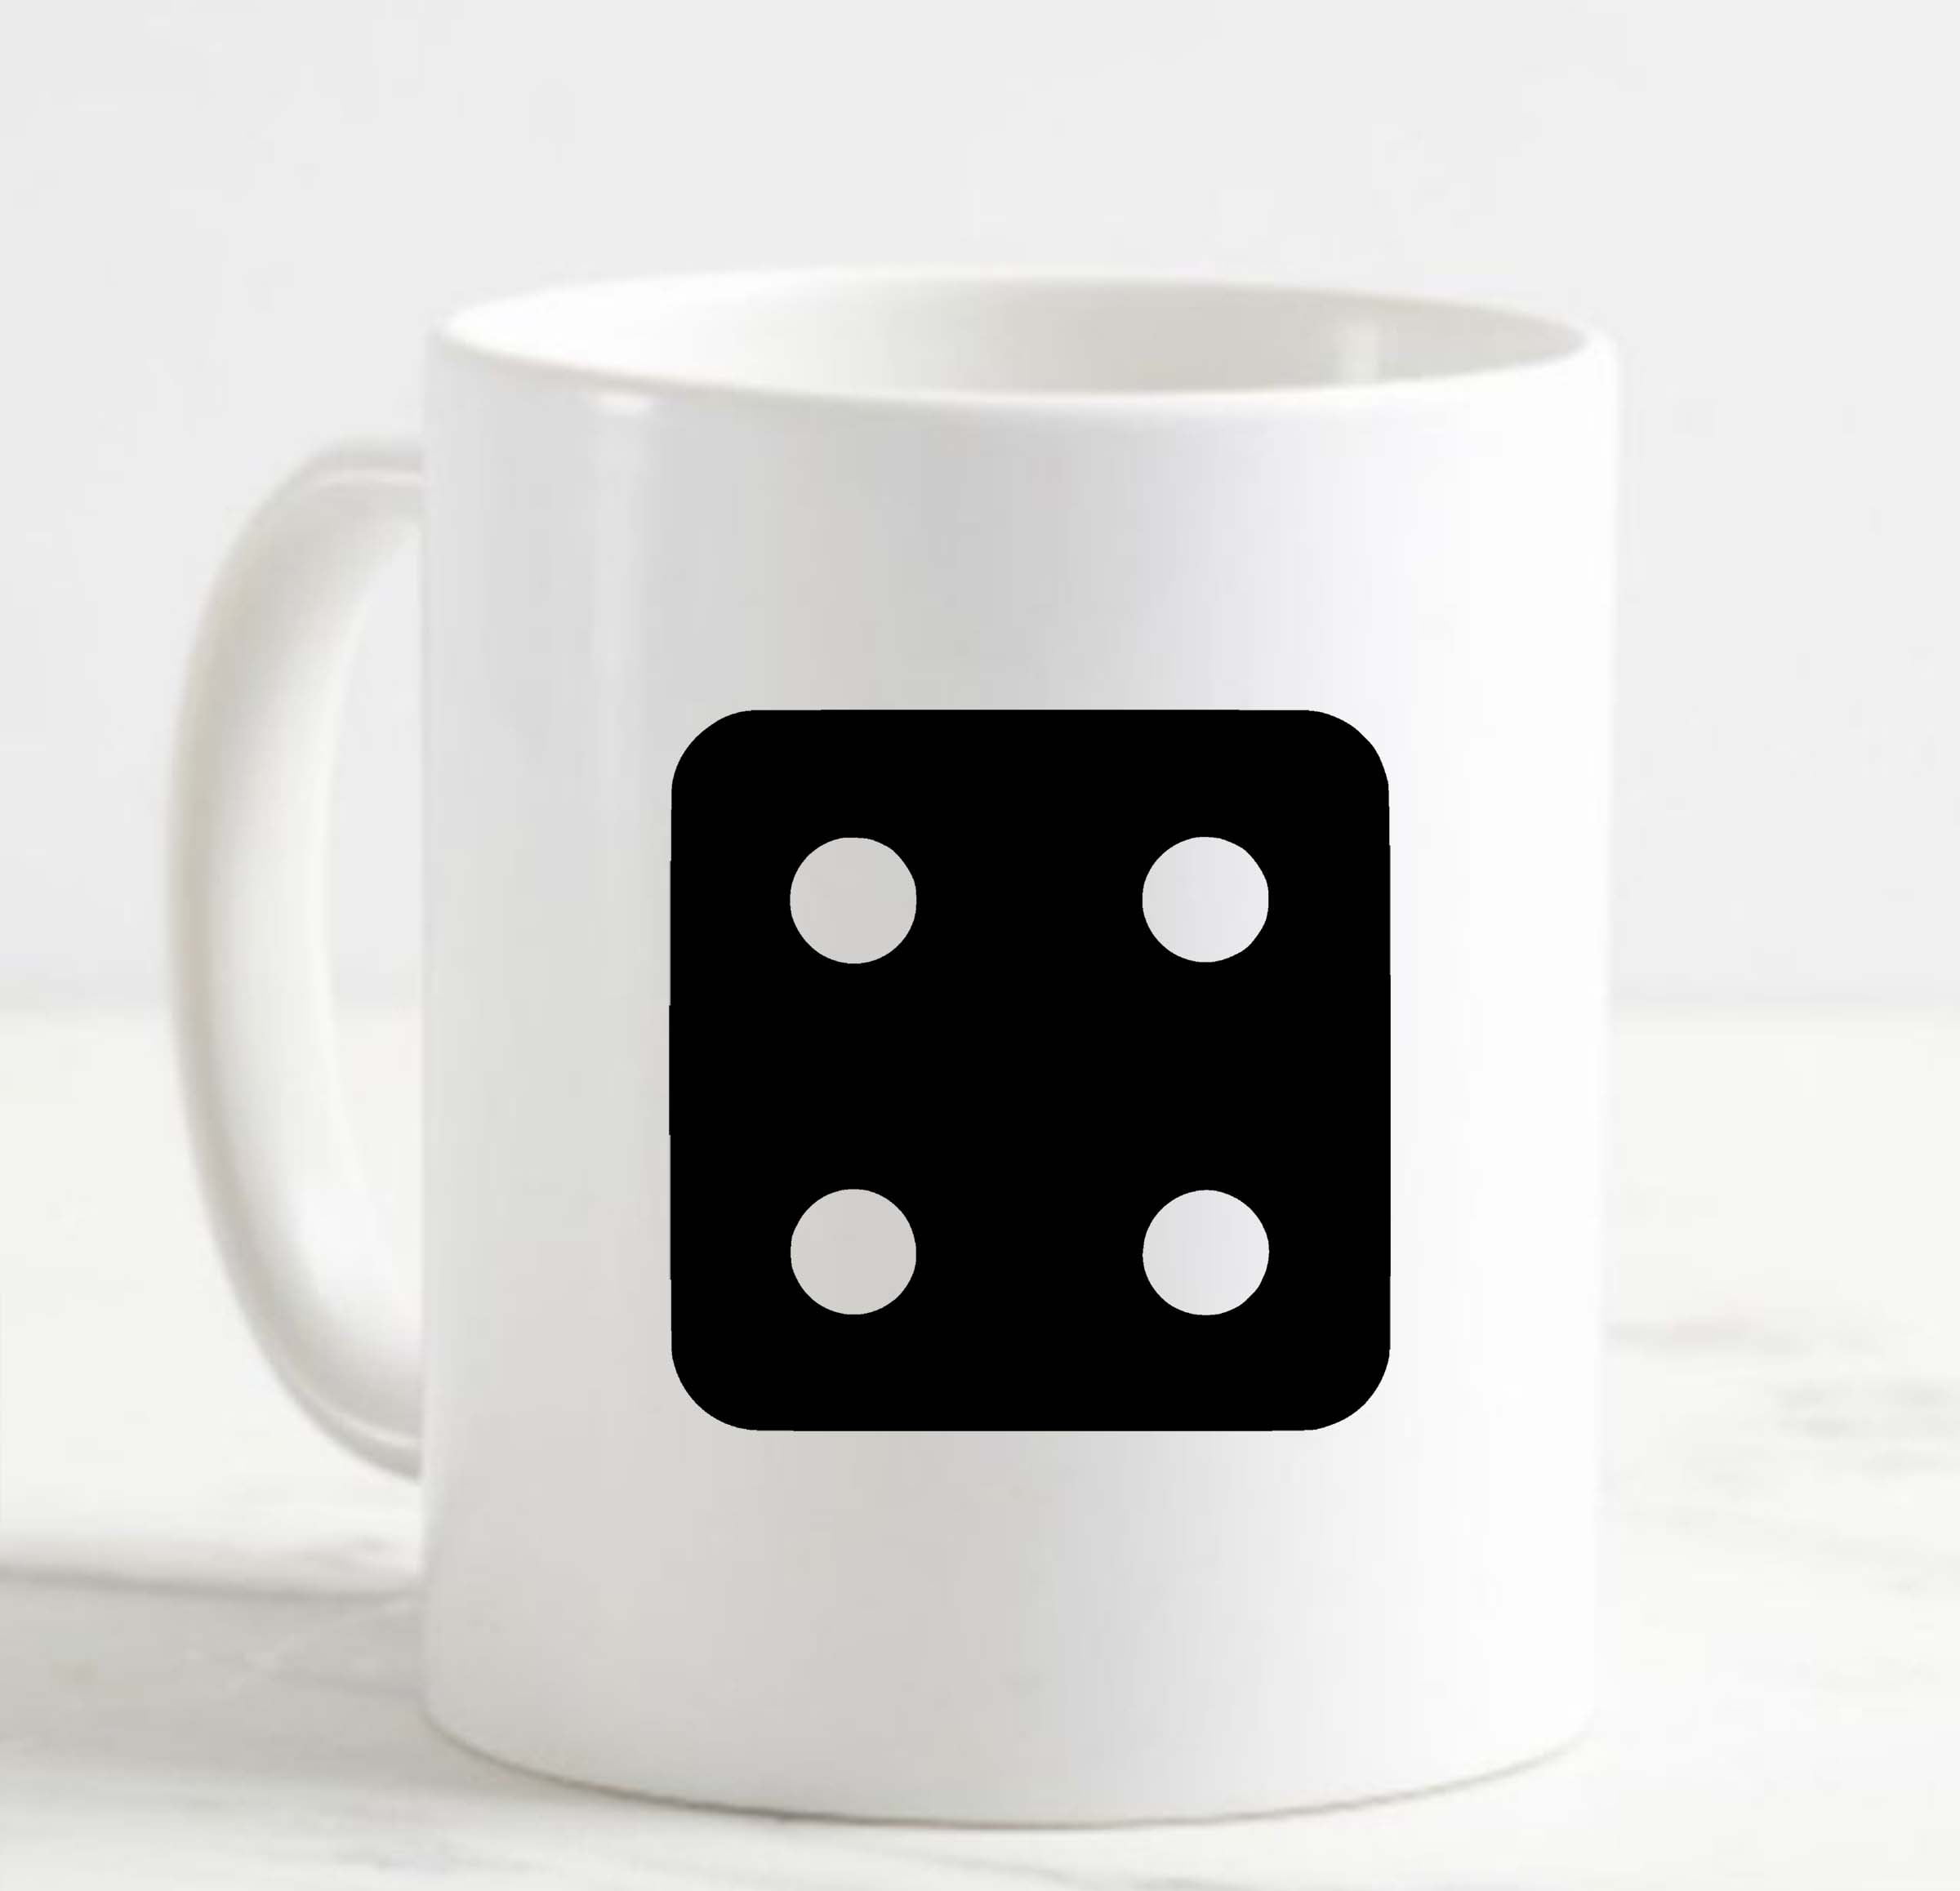 Coffee Mug This Is How I Roll Dice Funny Game Bet Casino White Cup Funny  Gifts for work office him her